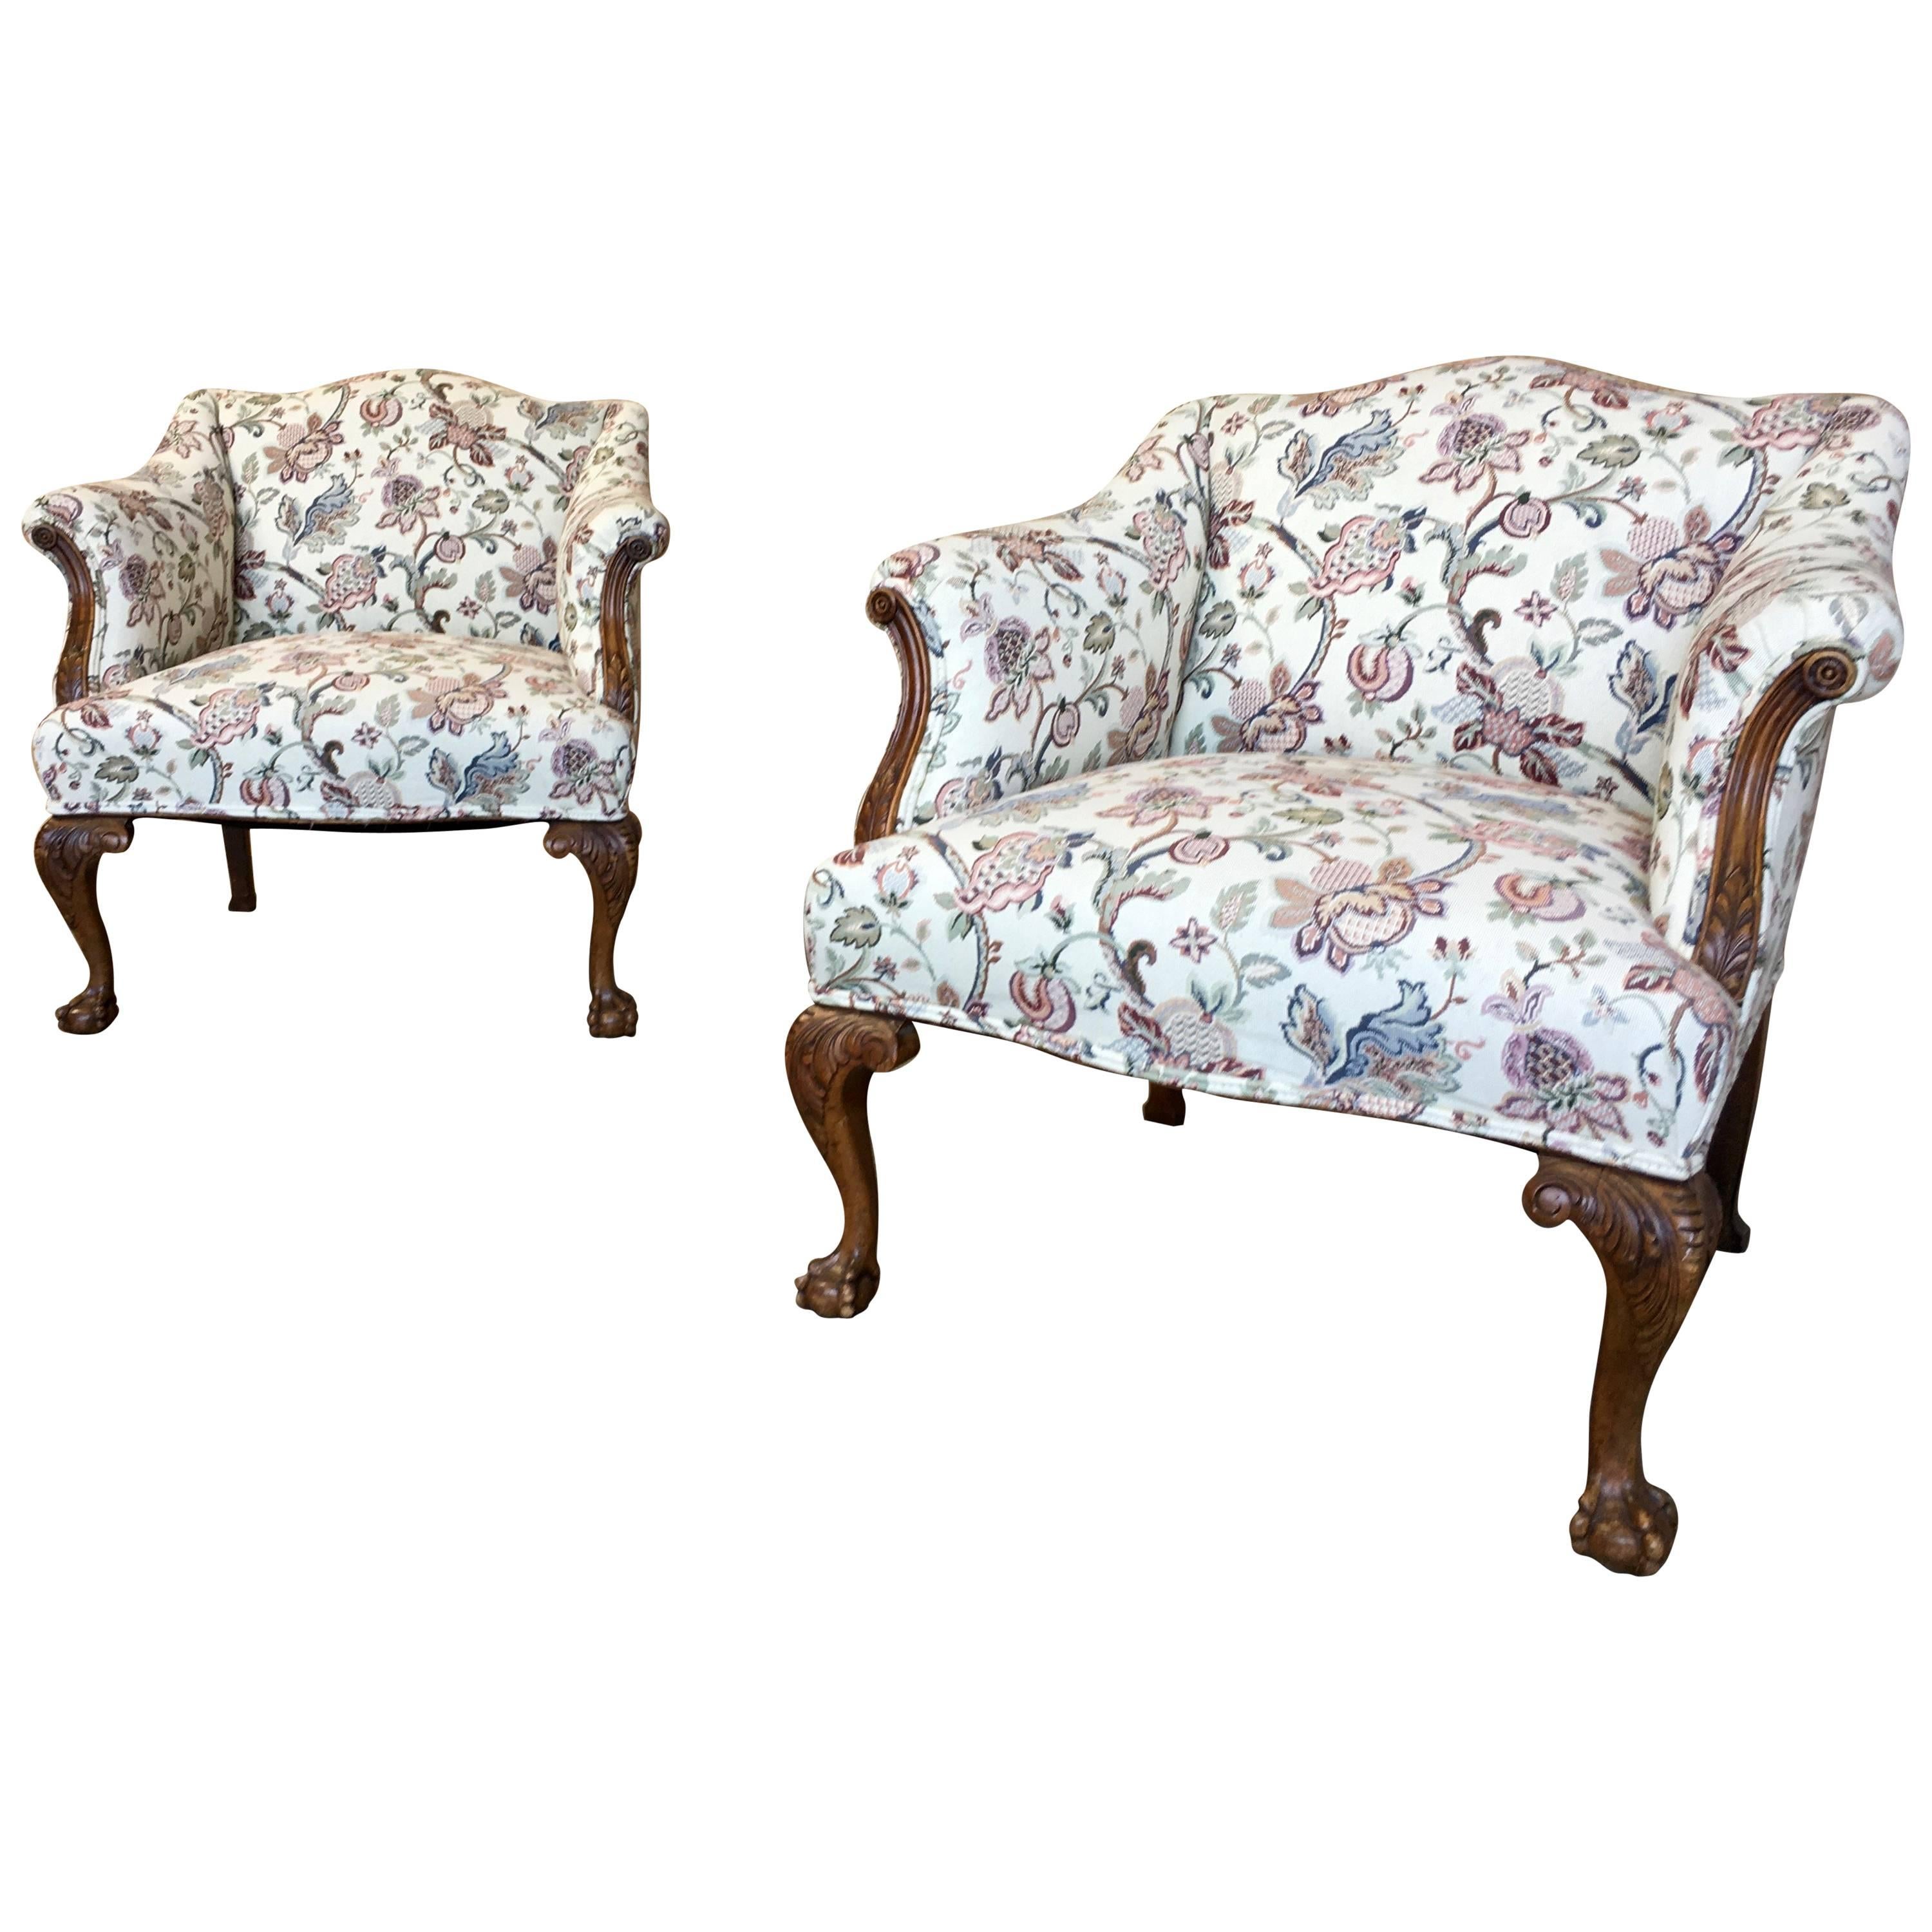 Pair of George III Style Lounge Chairs